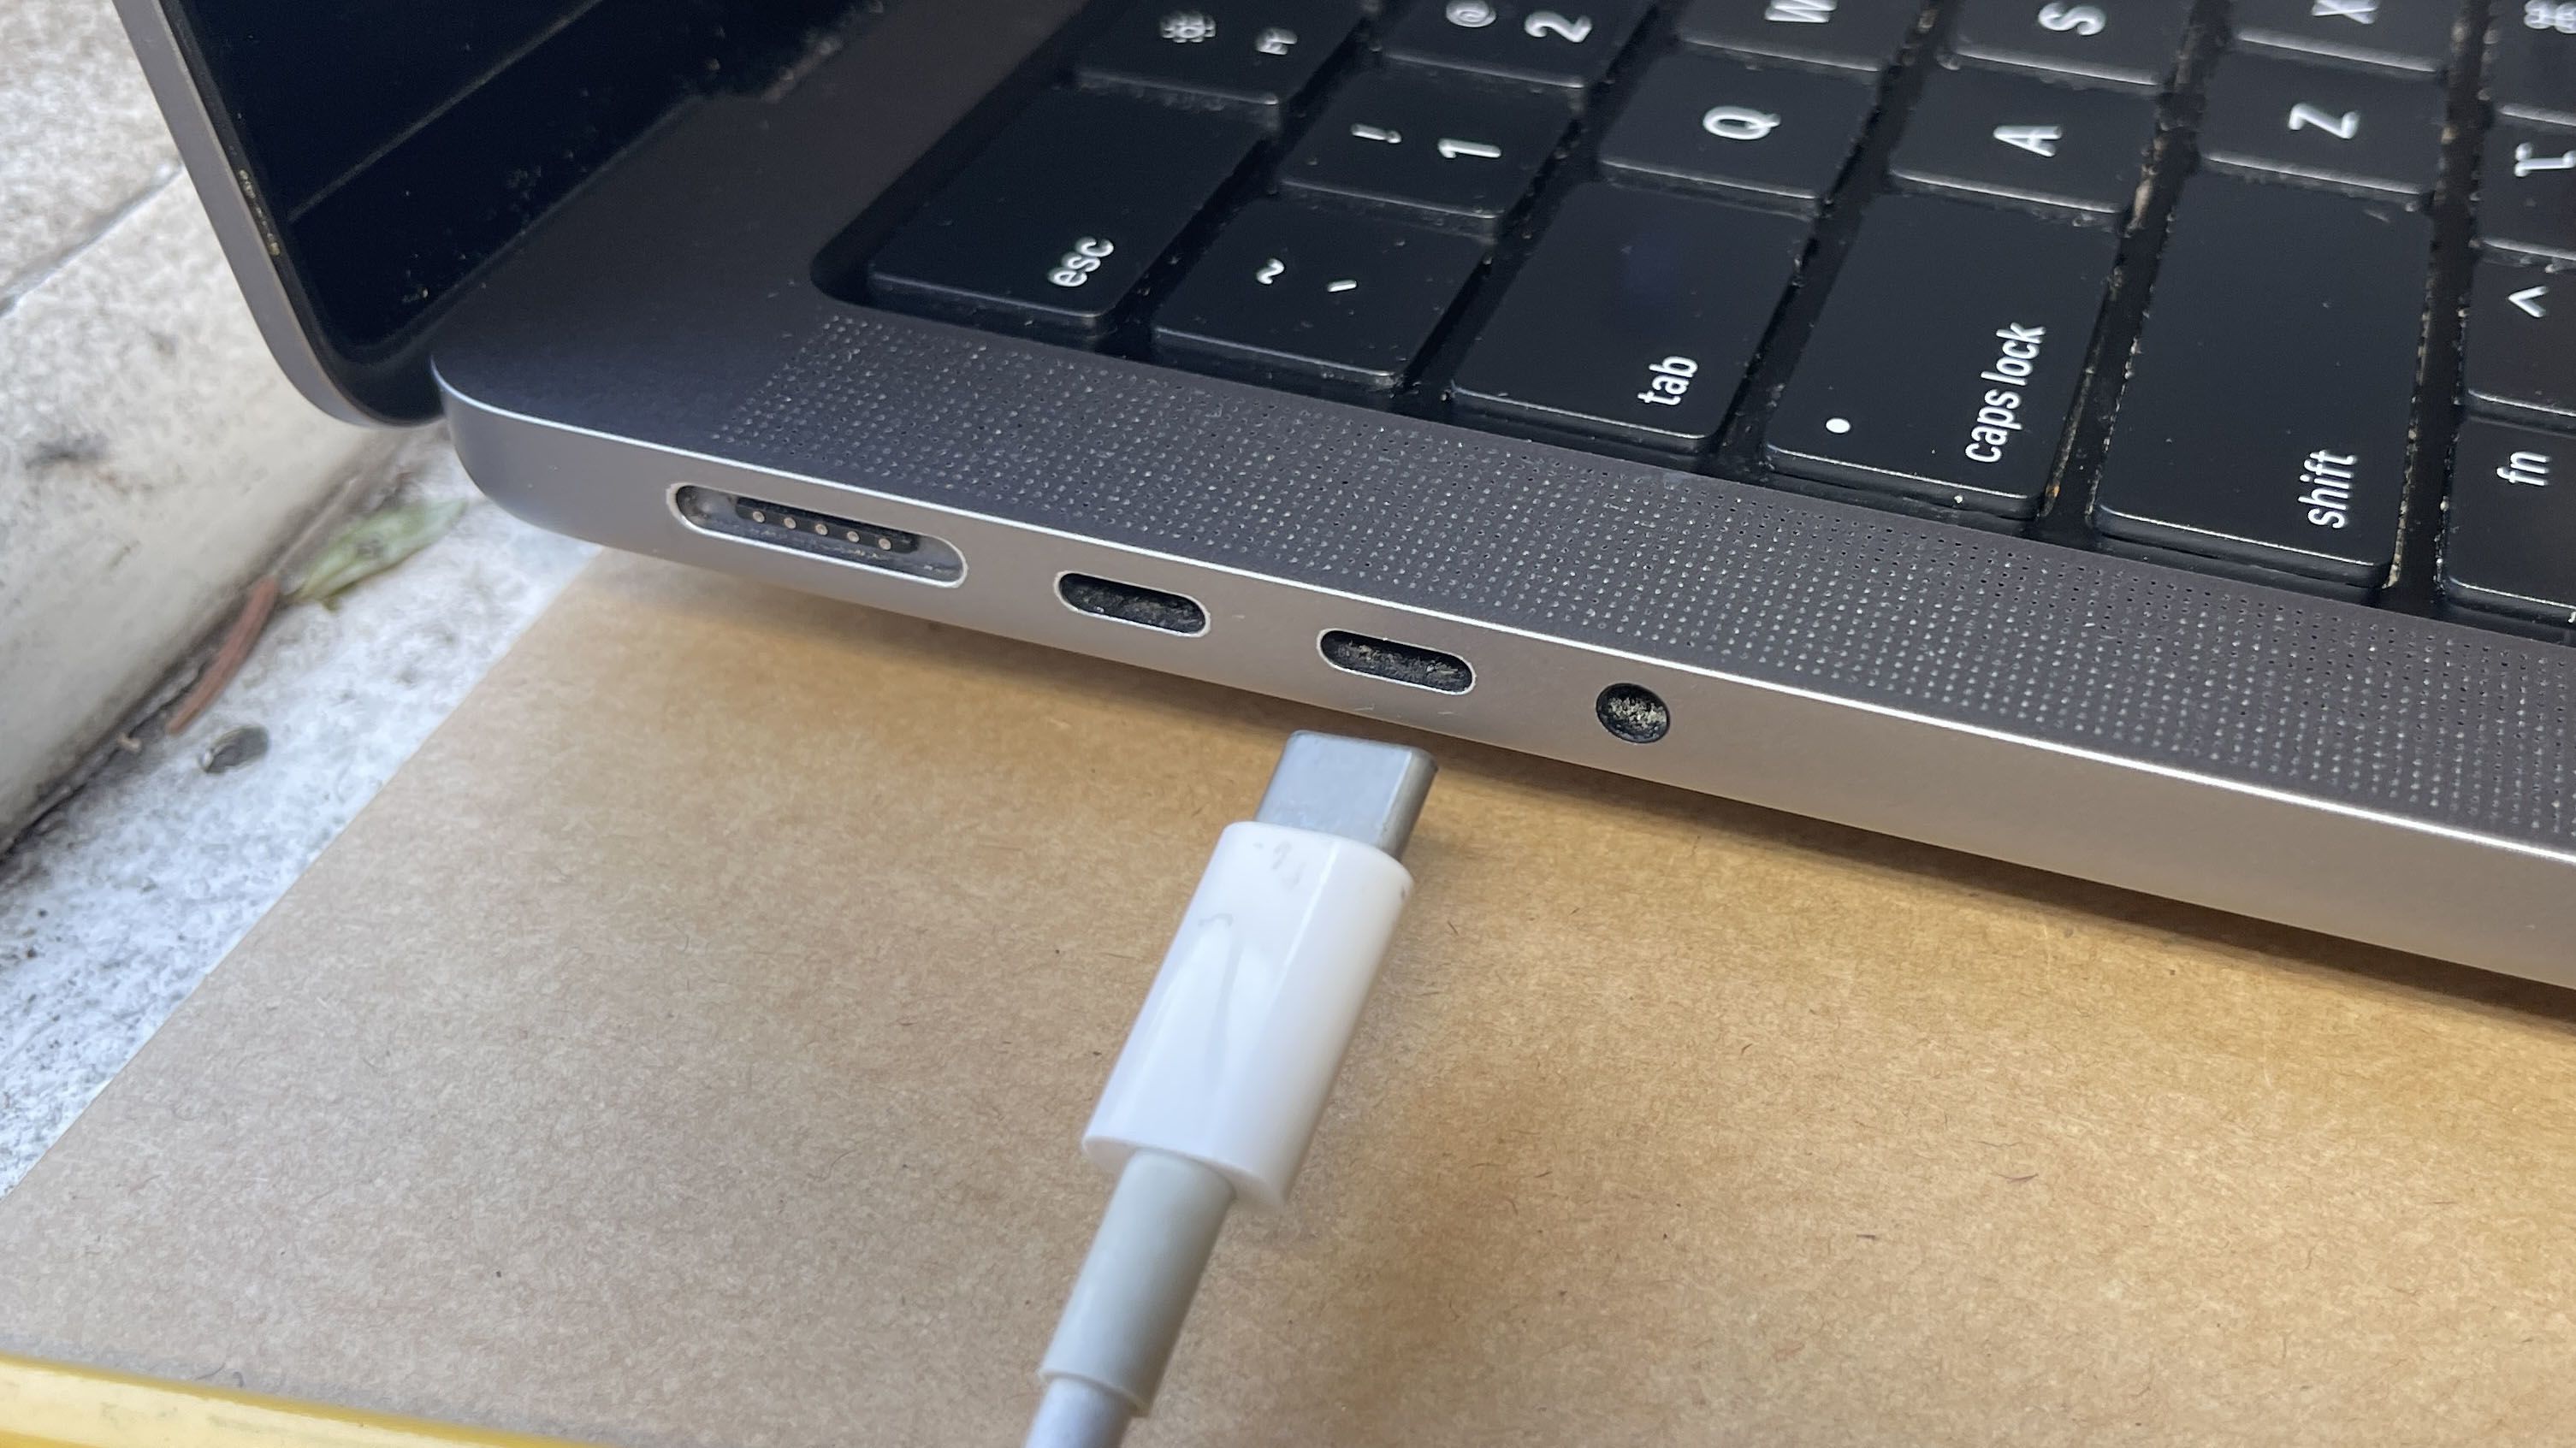 USB-C explained: How to get the most from it (and why it keeps on getting  better)